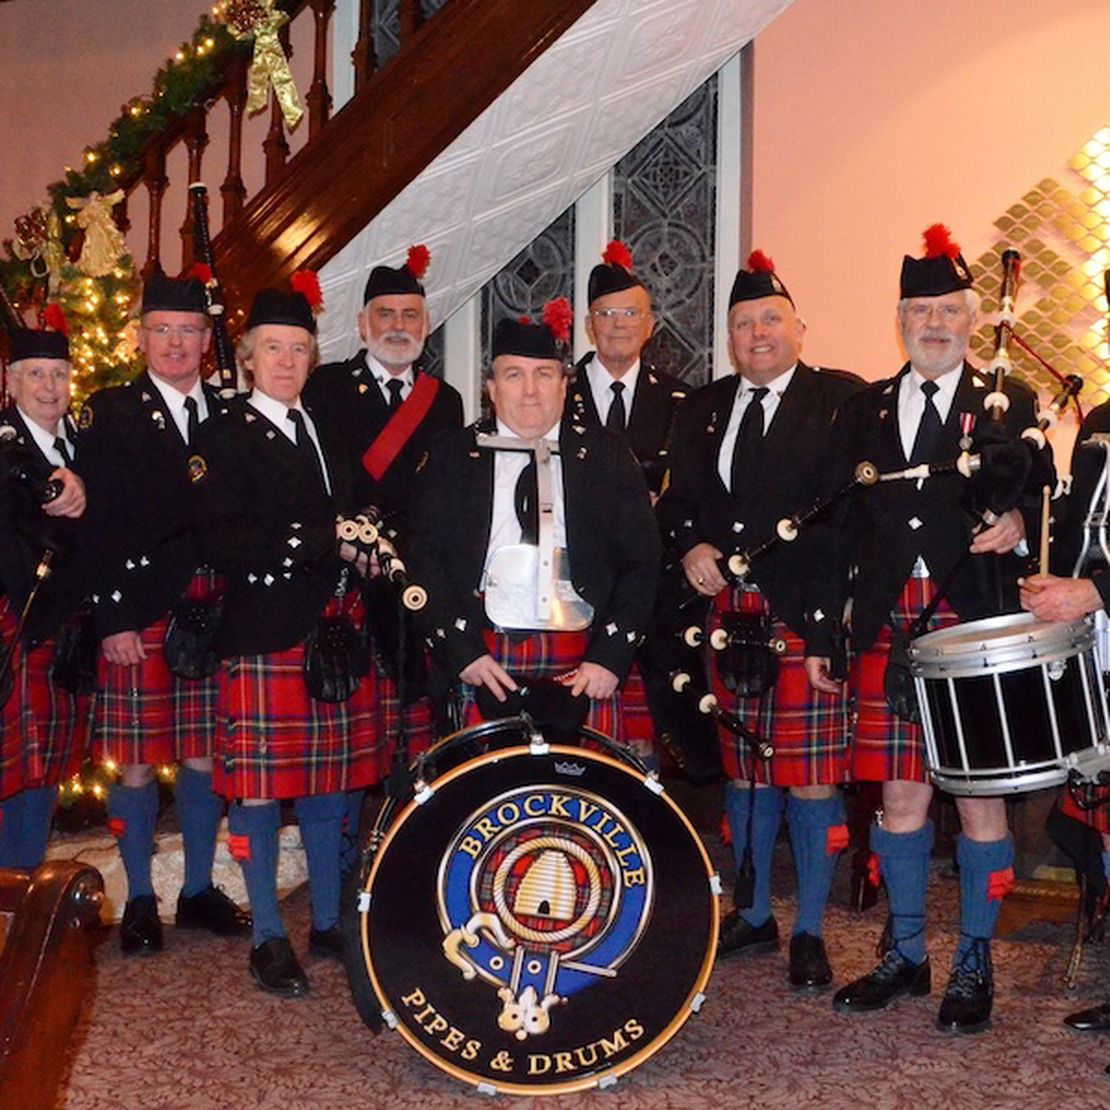 Brockville Pipes and Drums